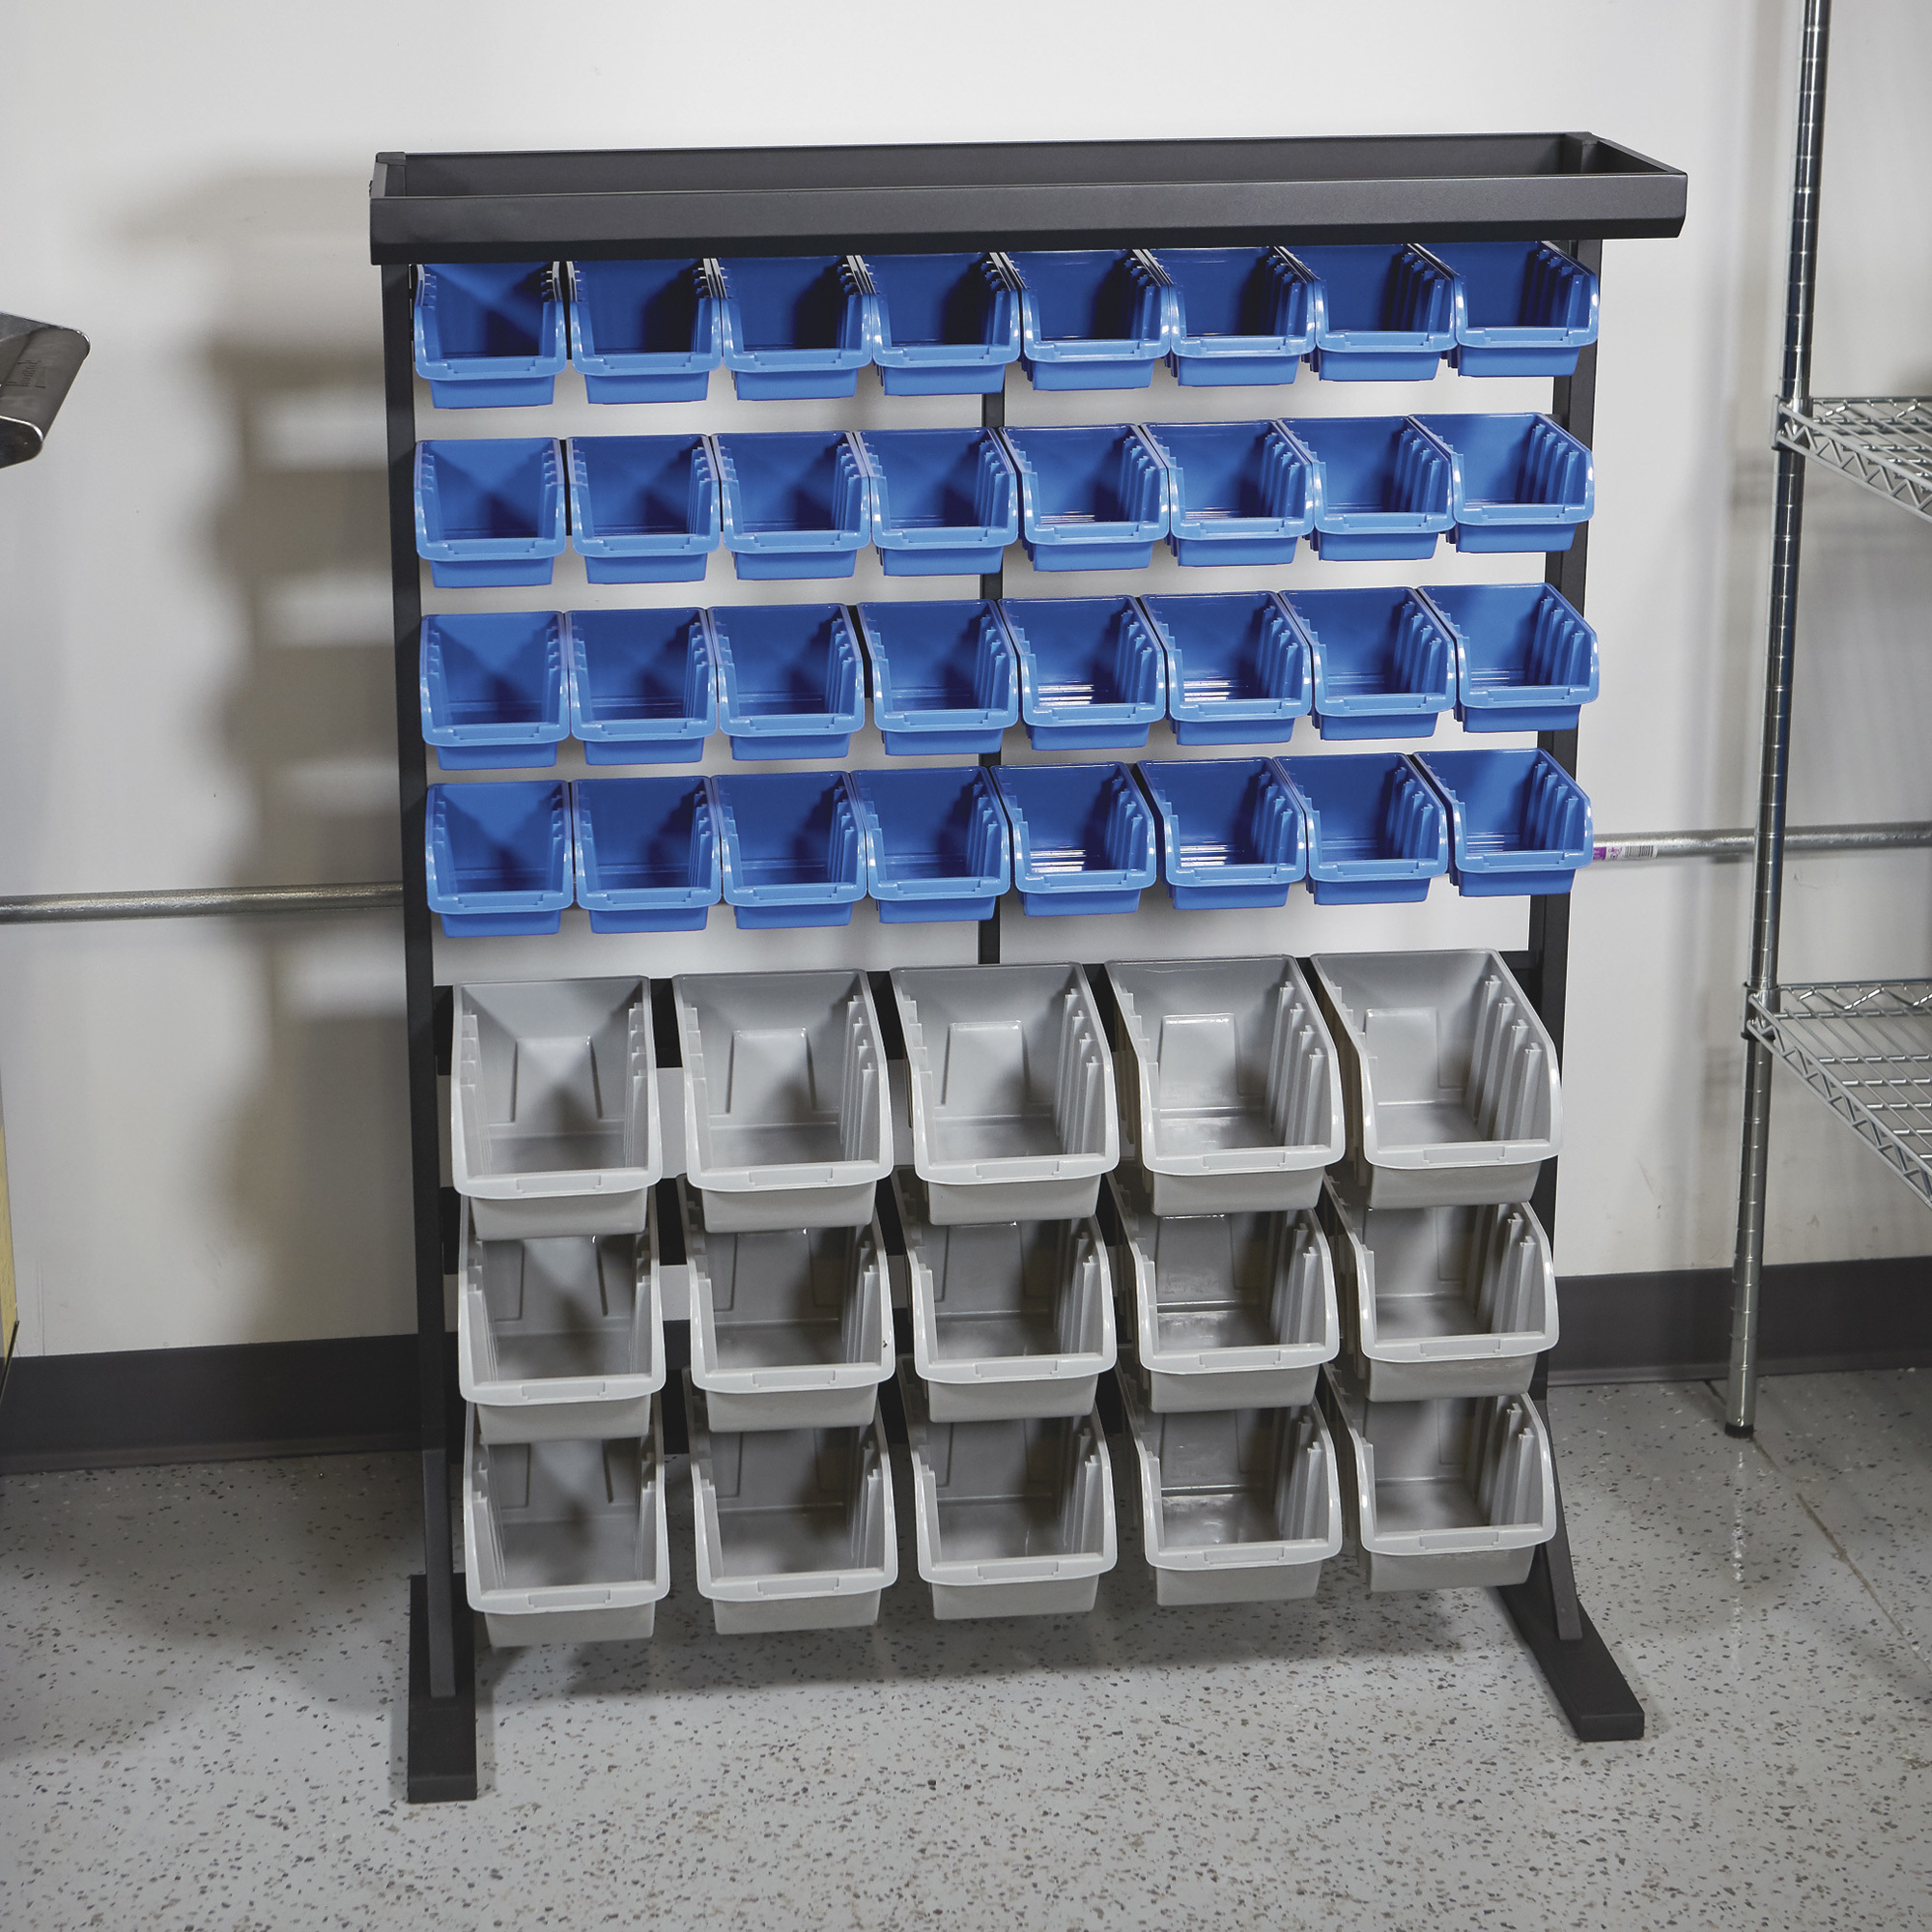 Hot Item] Powerway Industrial Warehouse Spare Parts Storage Hanging Bin for  Bolt